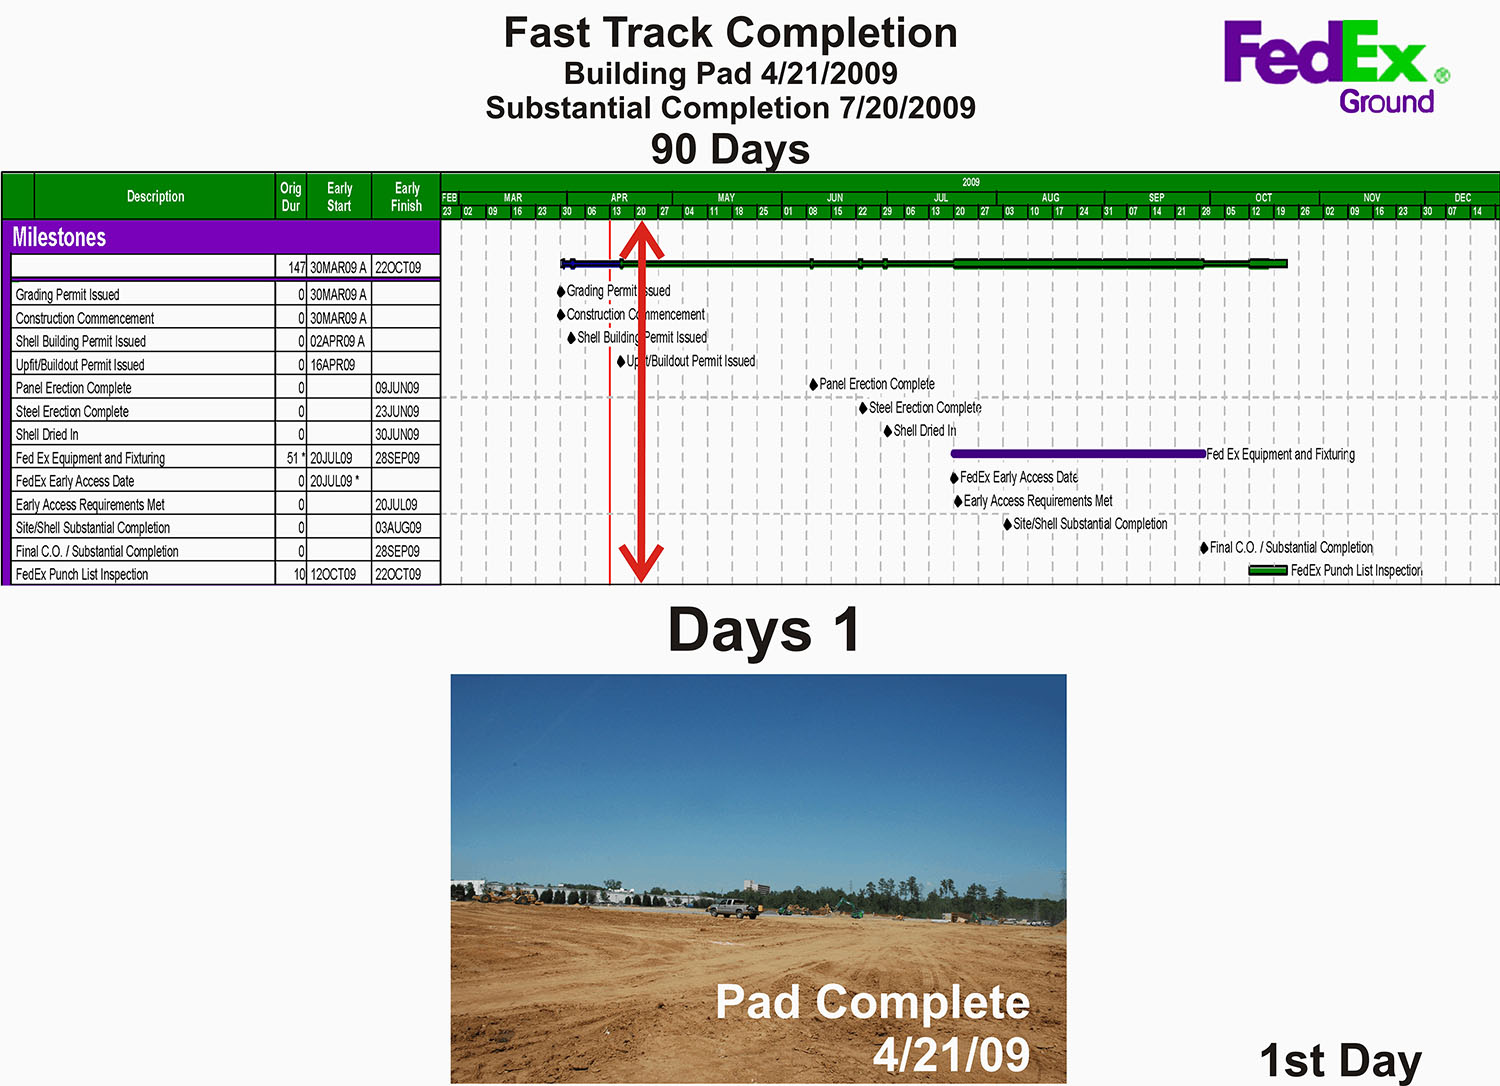 Fast Track Project - Fast Track Project